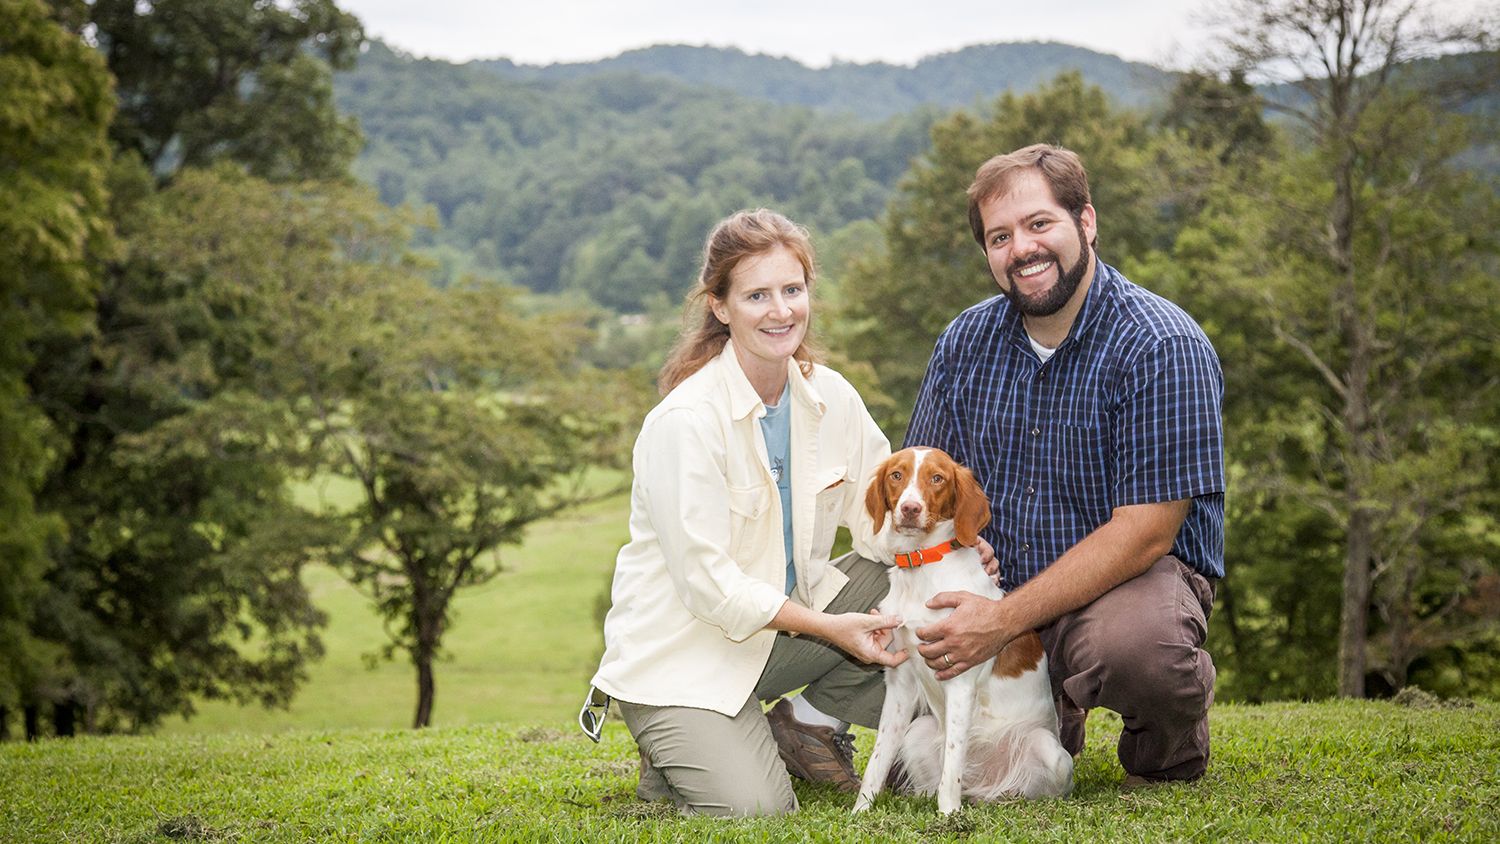 On their farm, Brittany Whitmire and Andy von Canon with their dog.